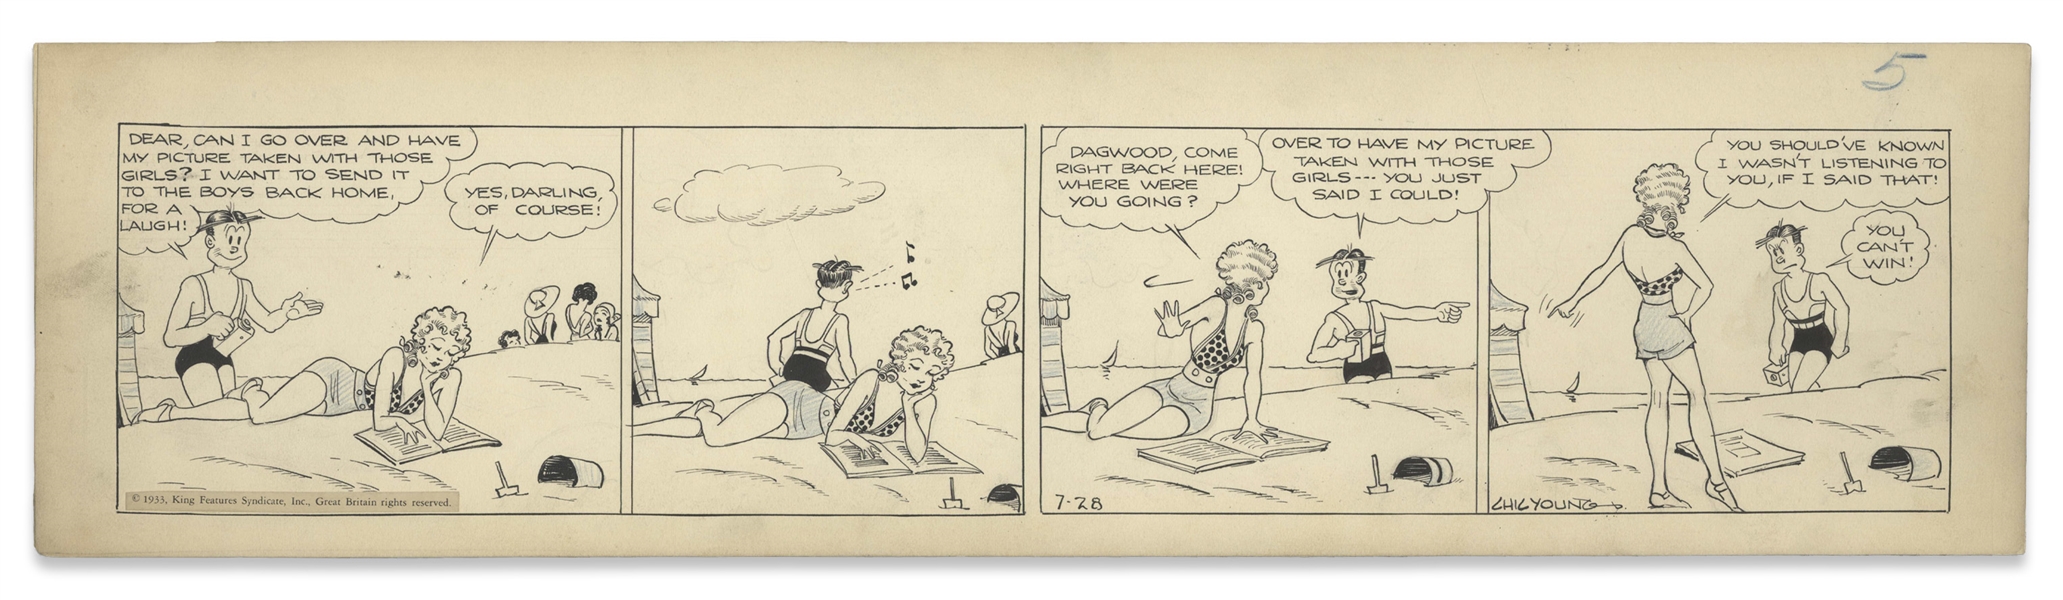 Chic Young Hand-Drawn ''Blondie'' Comic Strip From 1933 Titled ''Men Are So Gullible'' -- Blondie Puts a Quash to Dagwood's Fun